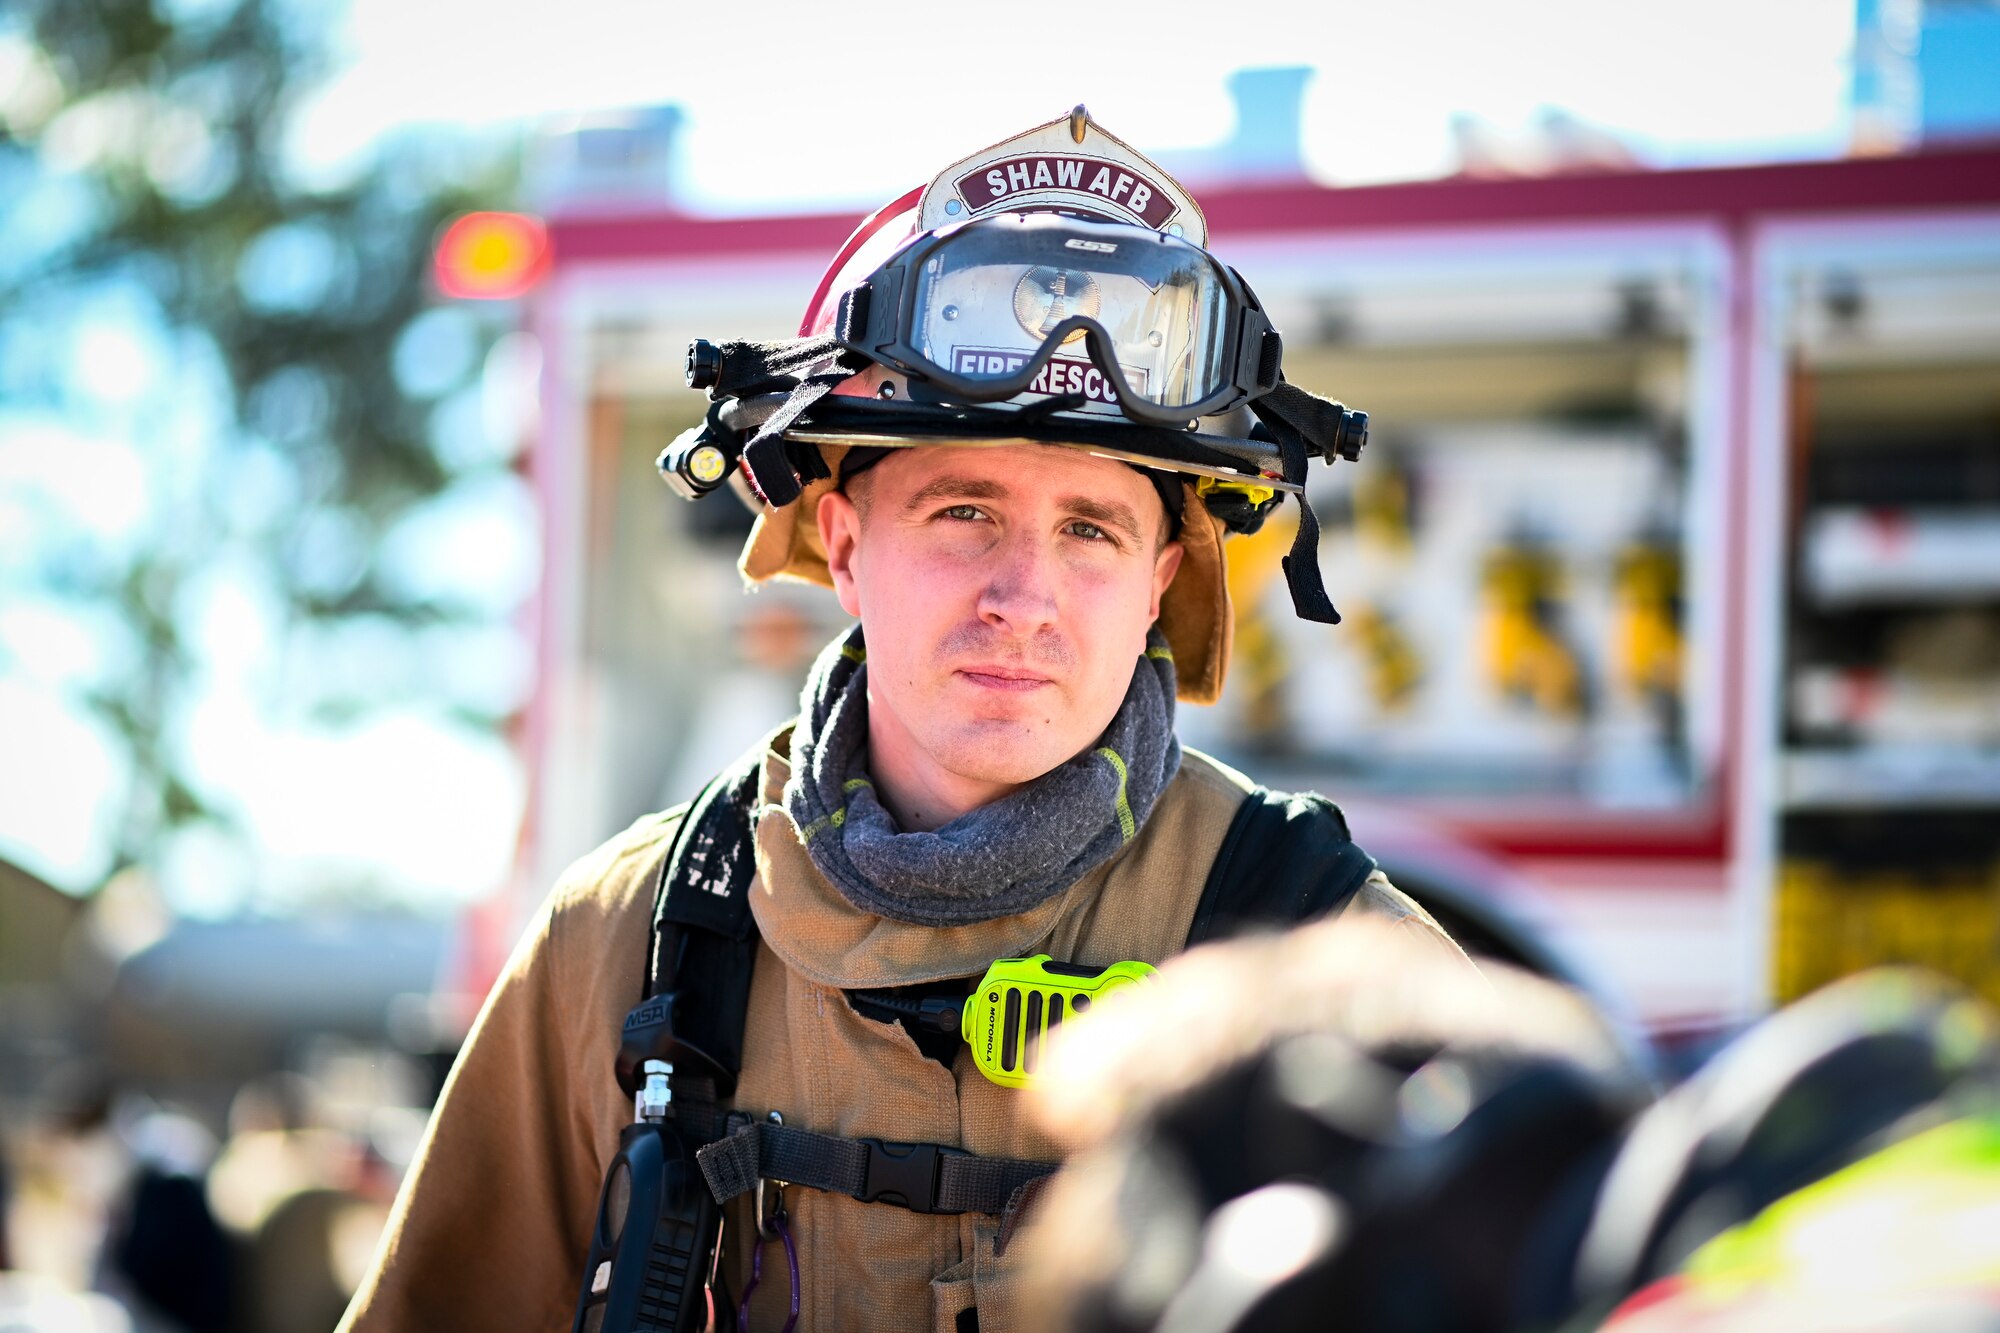 U.S. Air Force Staff Sgt. Andrew Cozart, 20th Civil Engineer Squadron lead firefighter, assesses the triage area for critical patients during a mass casualty exercise at Shaw Air Force Base, South Carolina, Jan. 19, 2022. The purpose of the exercise was to enhance and build on each agency's readiness capabilities for quick response emergencies. (U.S. Air Force photo by Senior Airman Madeline Herzog)